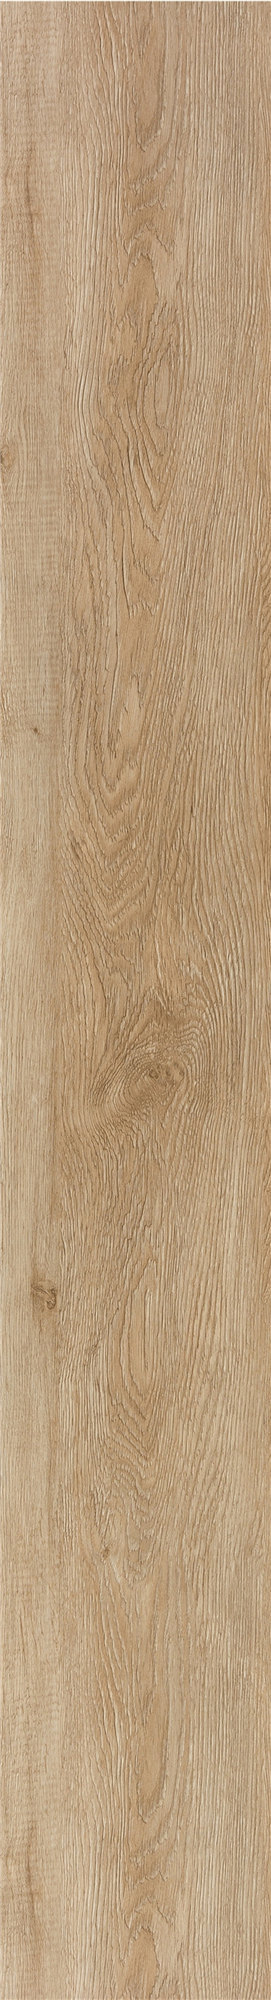 Wholesale PVC Plank Flooring Self Adhesive 6''x36'' | Wood Look Flooring 2mm Direct From Manufacturer Cost Affordable HIF 20485